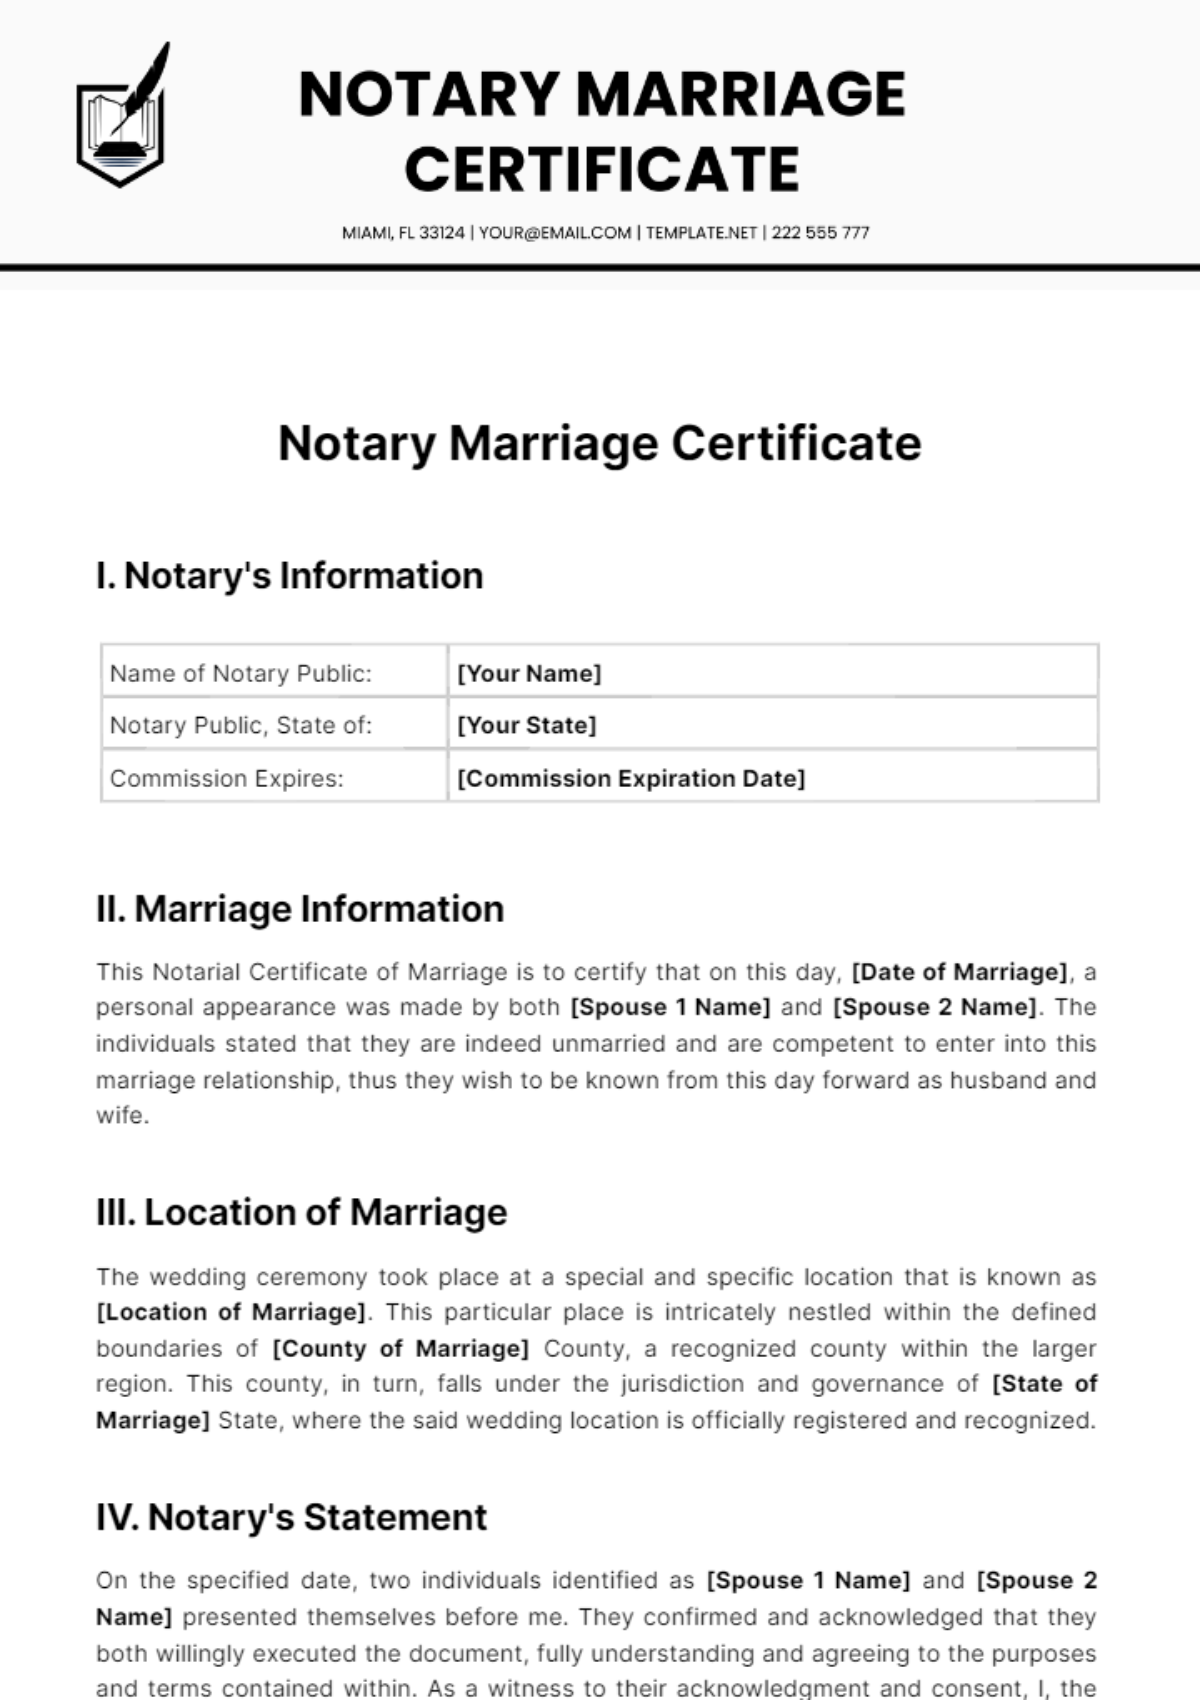 Free Notary Marriage Certificate Template